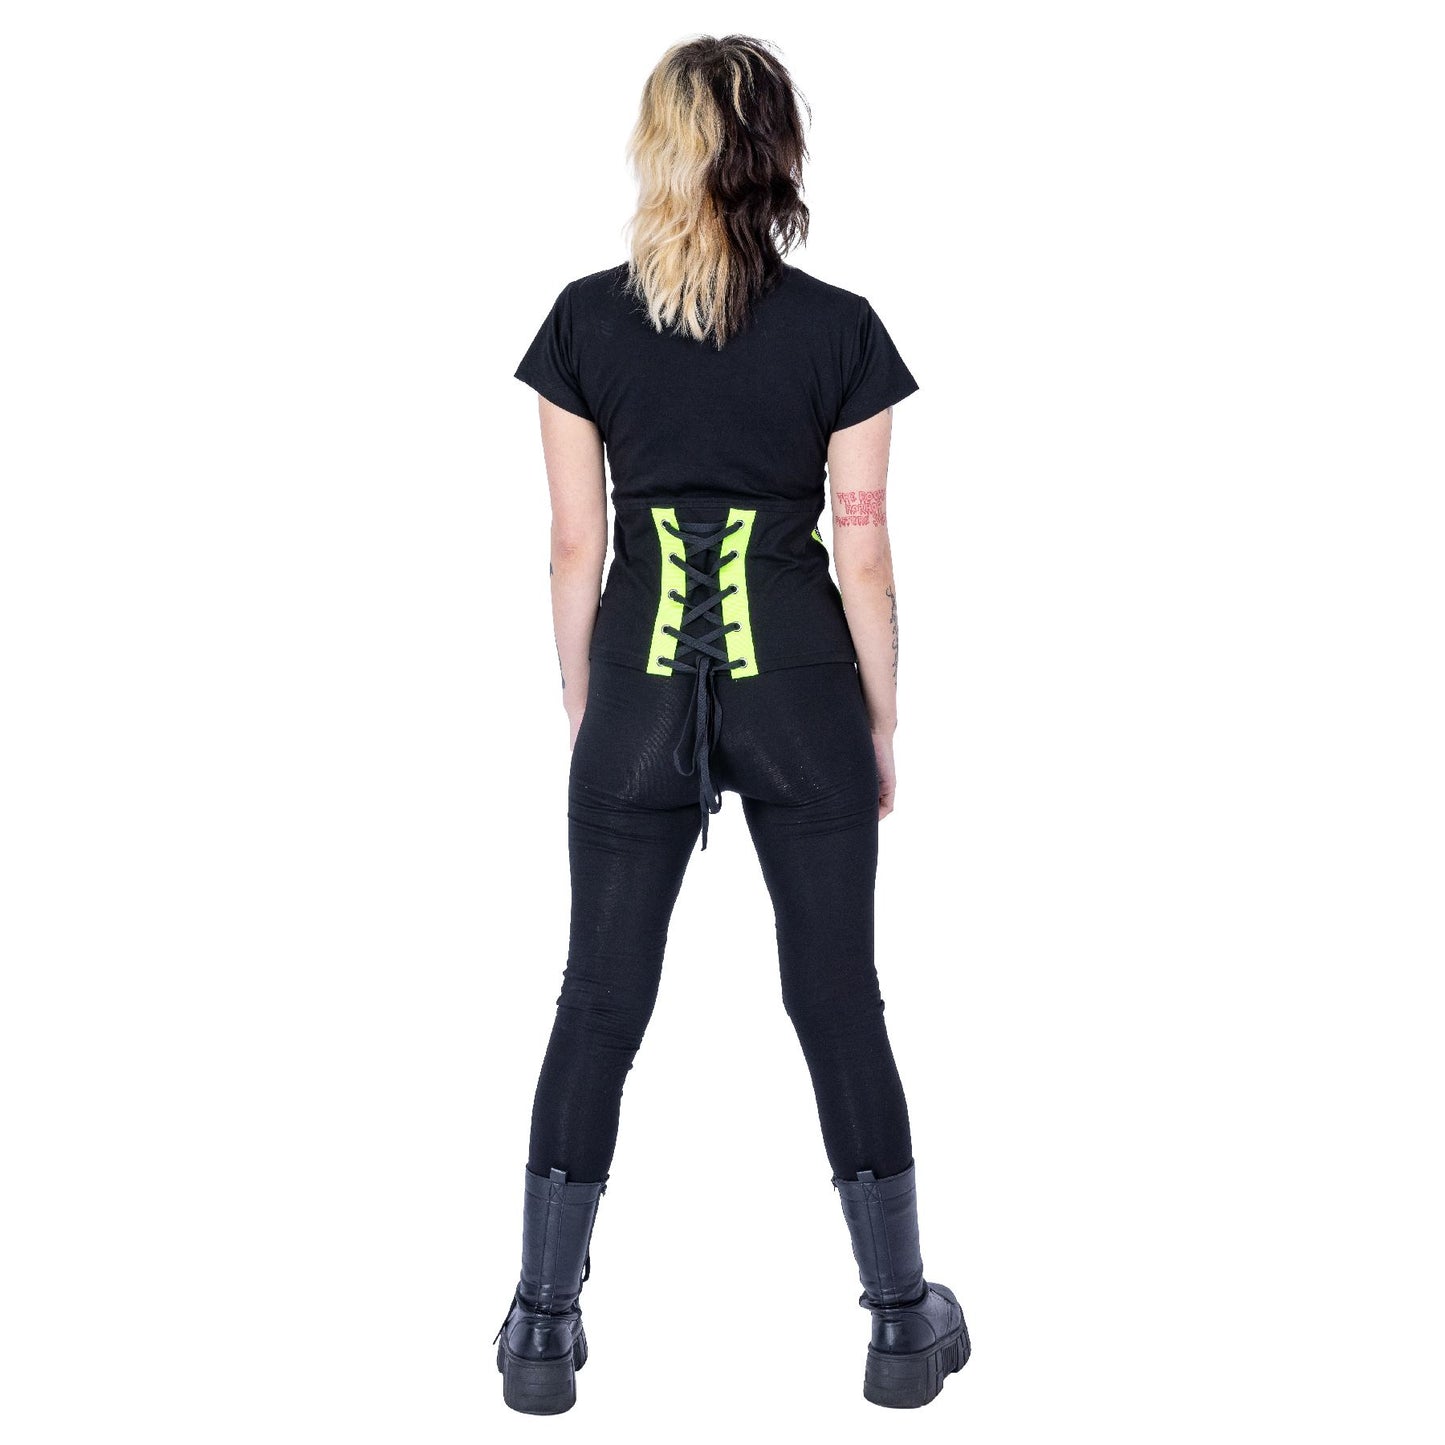 RESTRICTED TOP - BLACK/GREEN